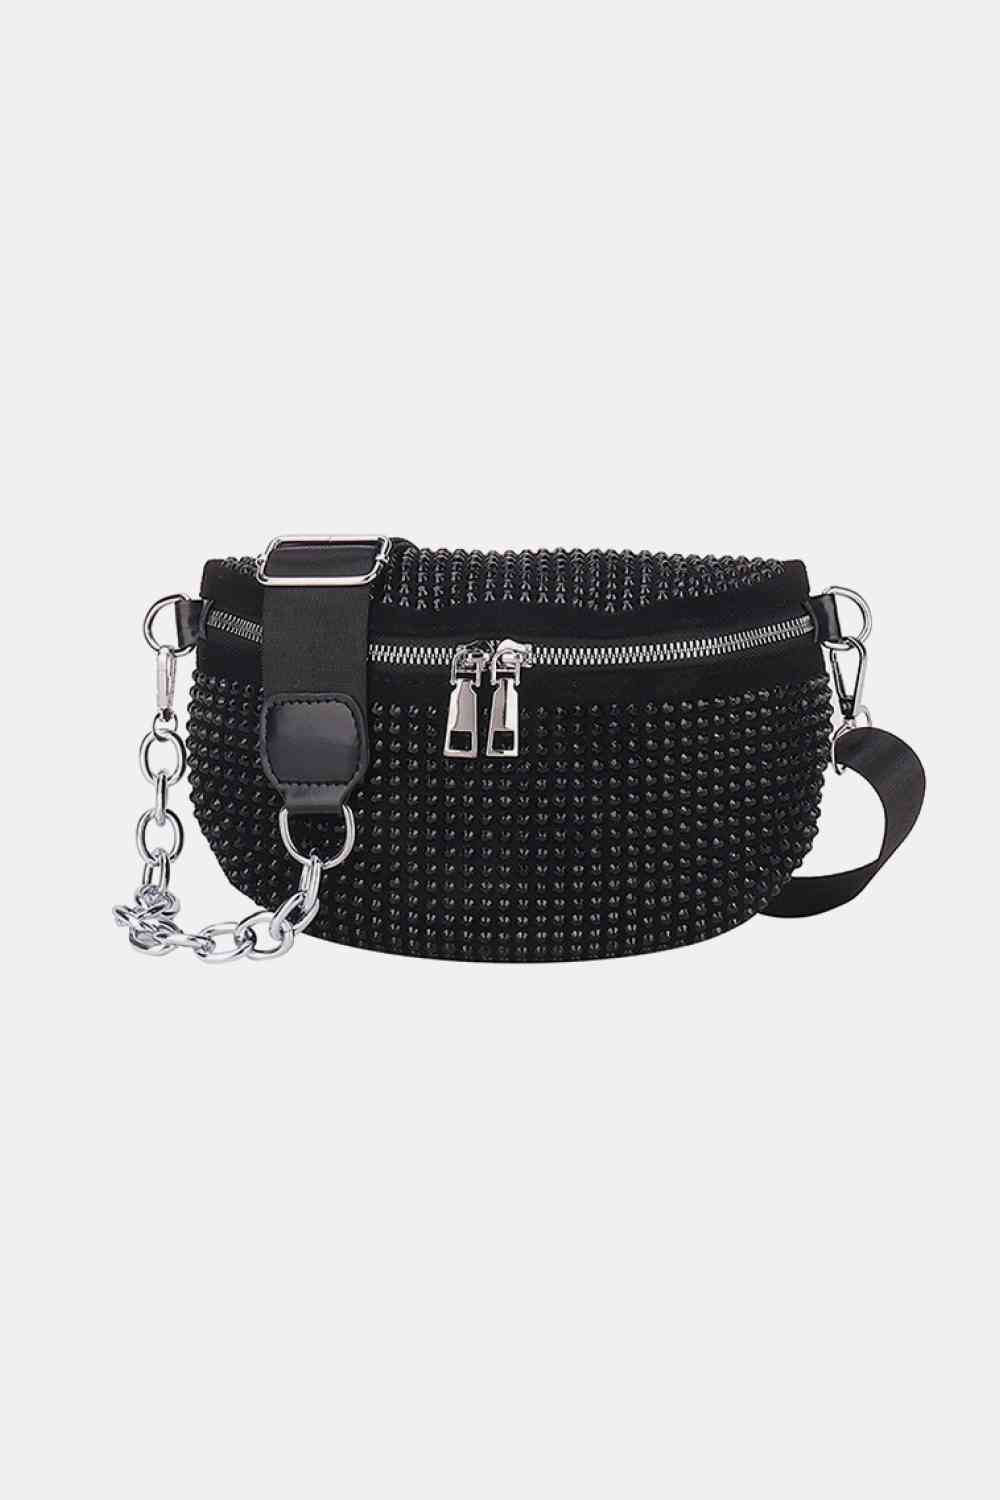 Rhinestone PU Leather Sling Bag free shipping -Oh Em Gee Boutique